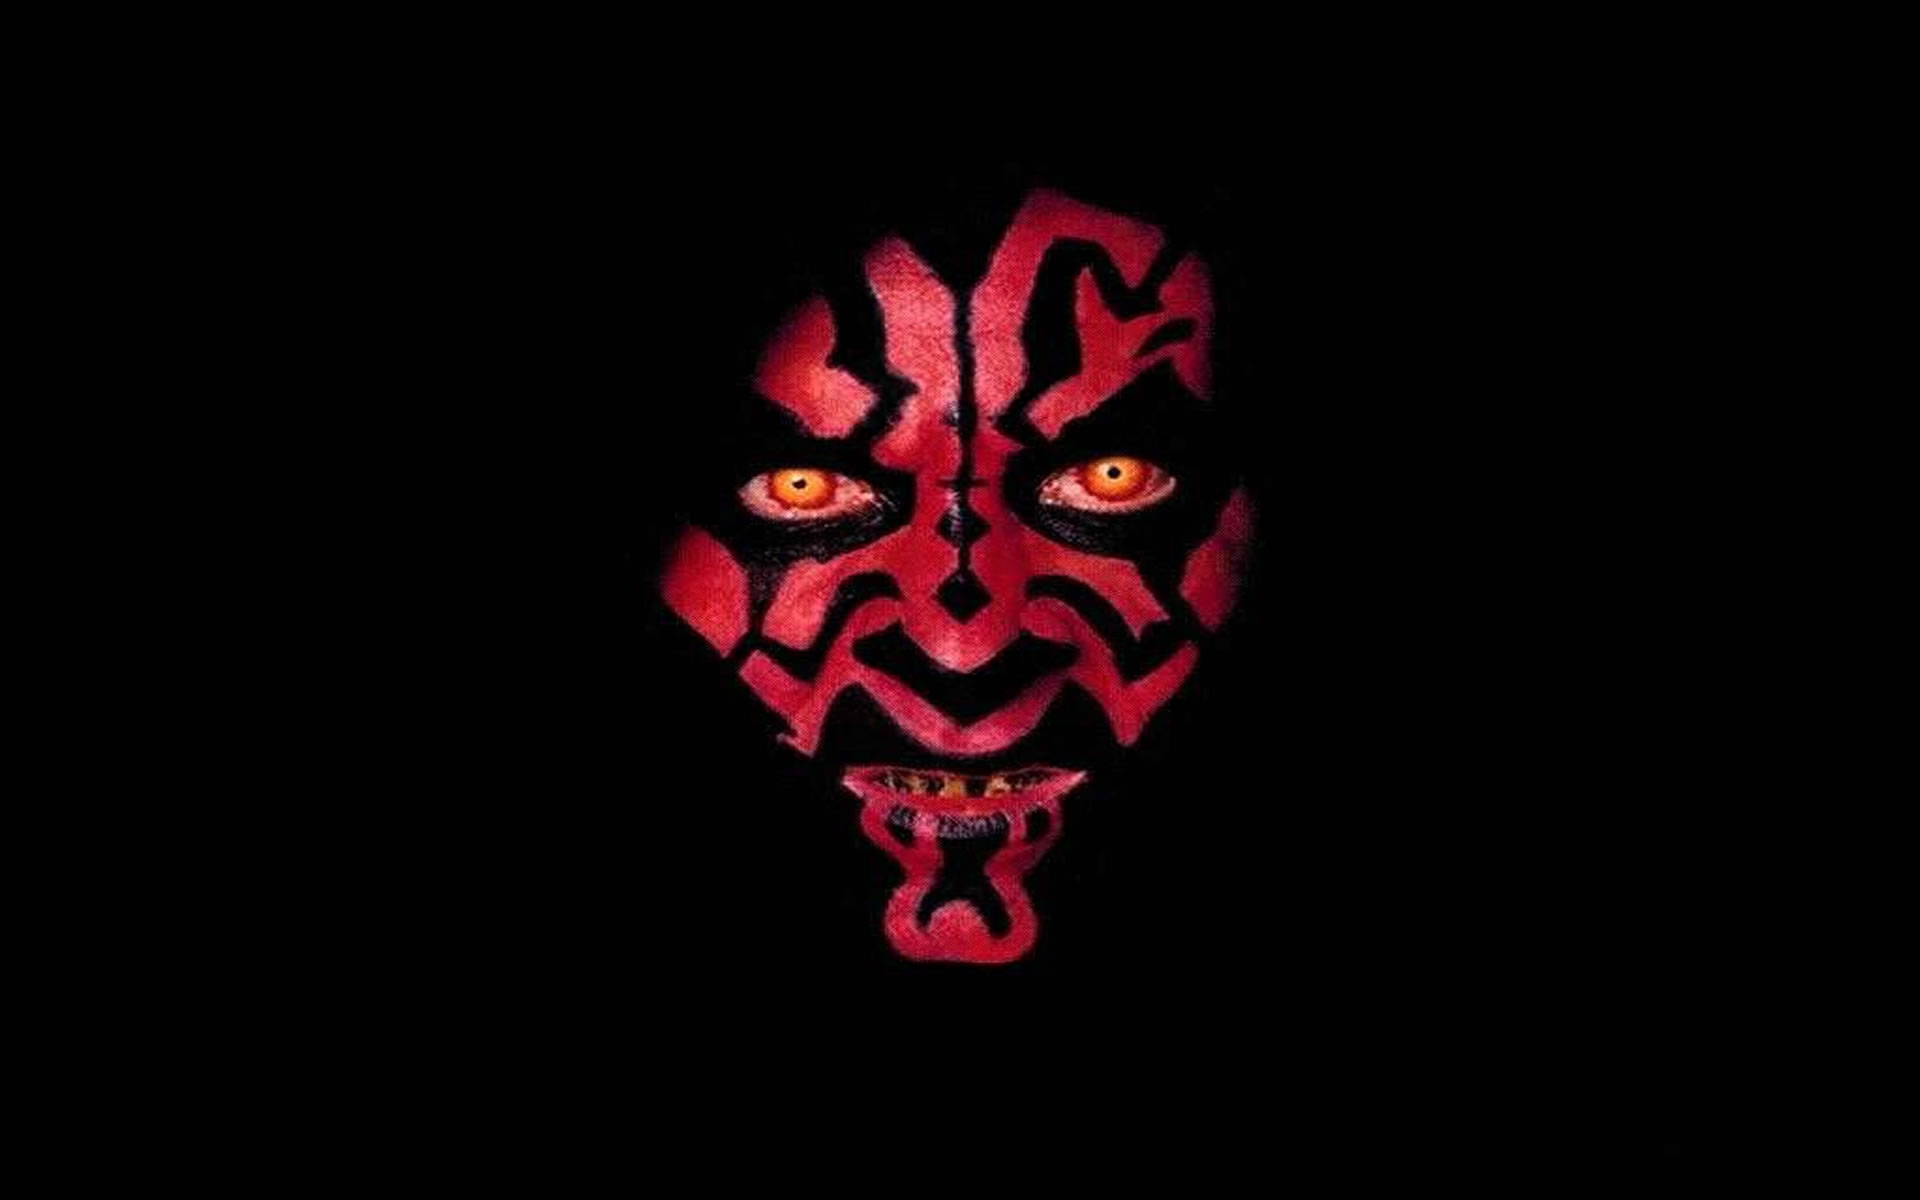 Star Wars Wallpaper Lord Sith   Wallpapers 1920x1200